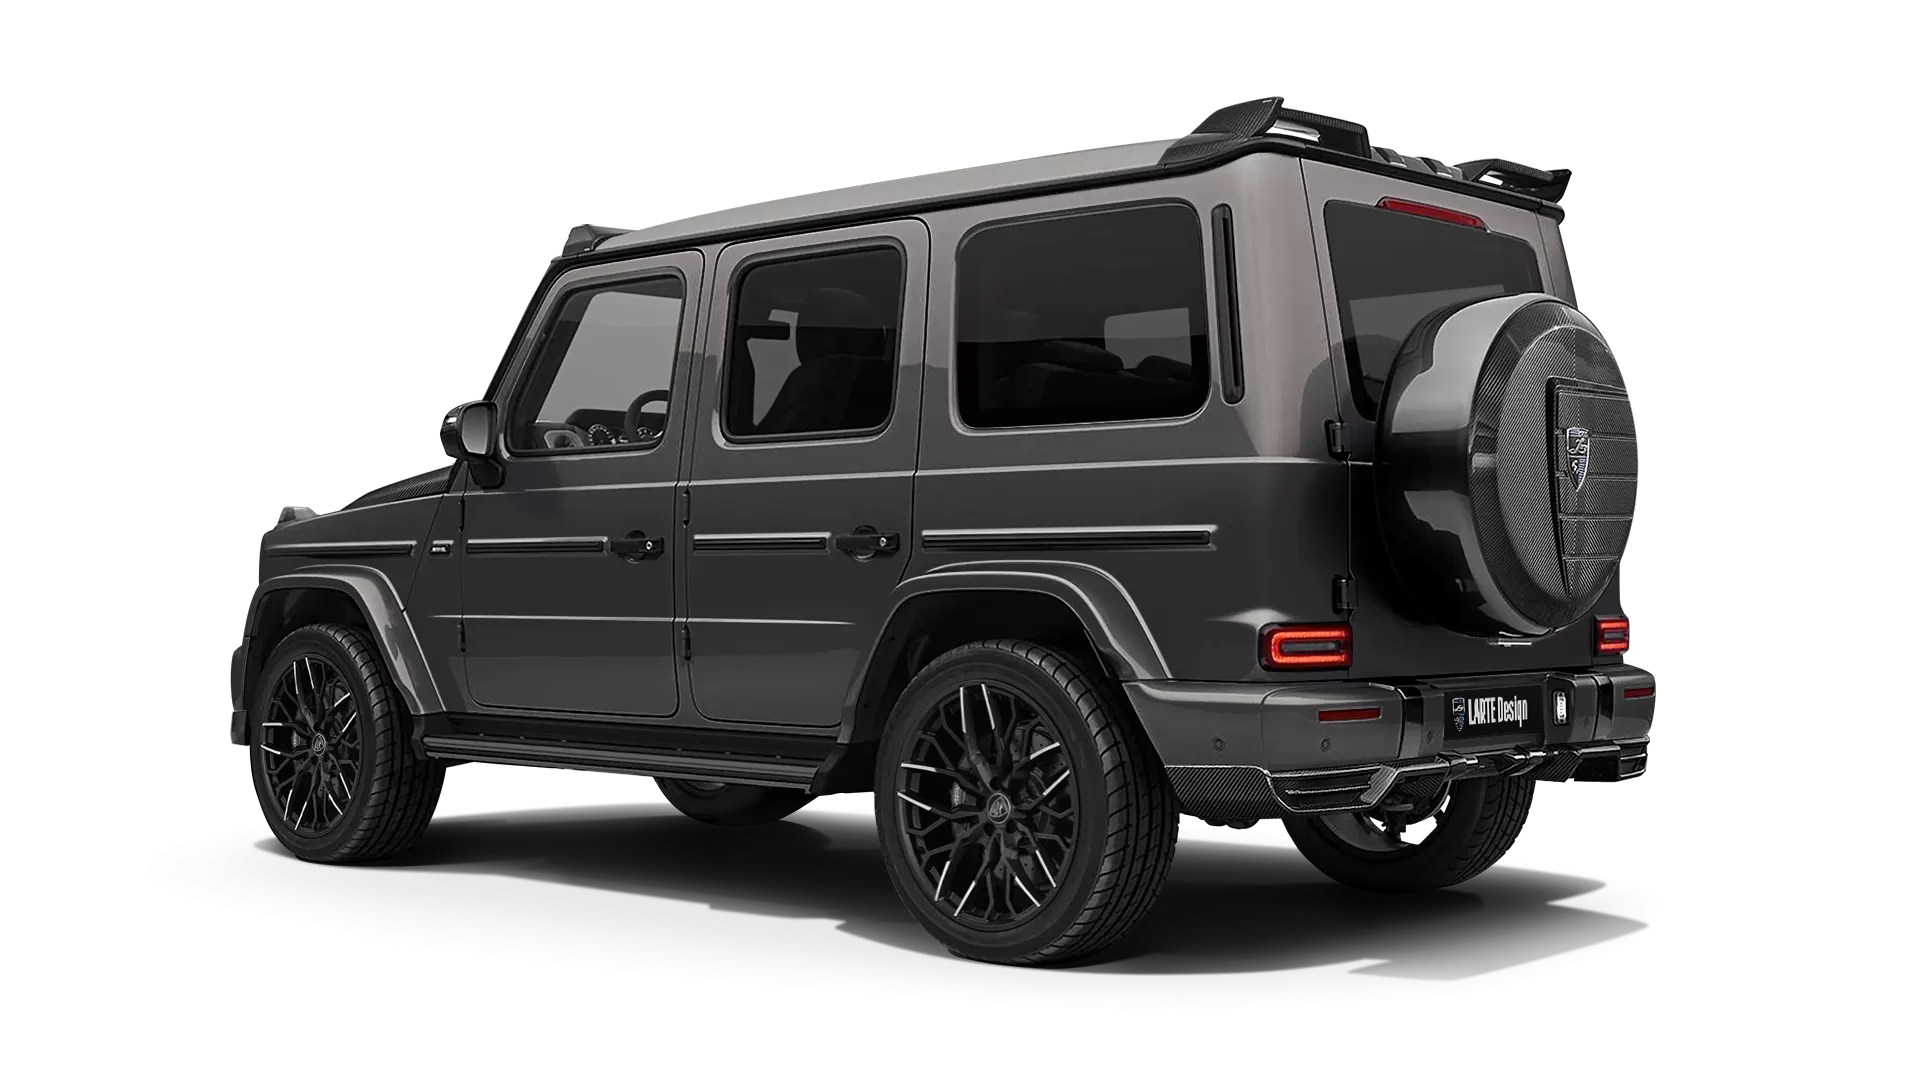 Mercedes G class W463 with carbon body kit: back view shown in Indium Grey